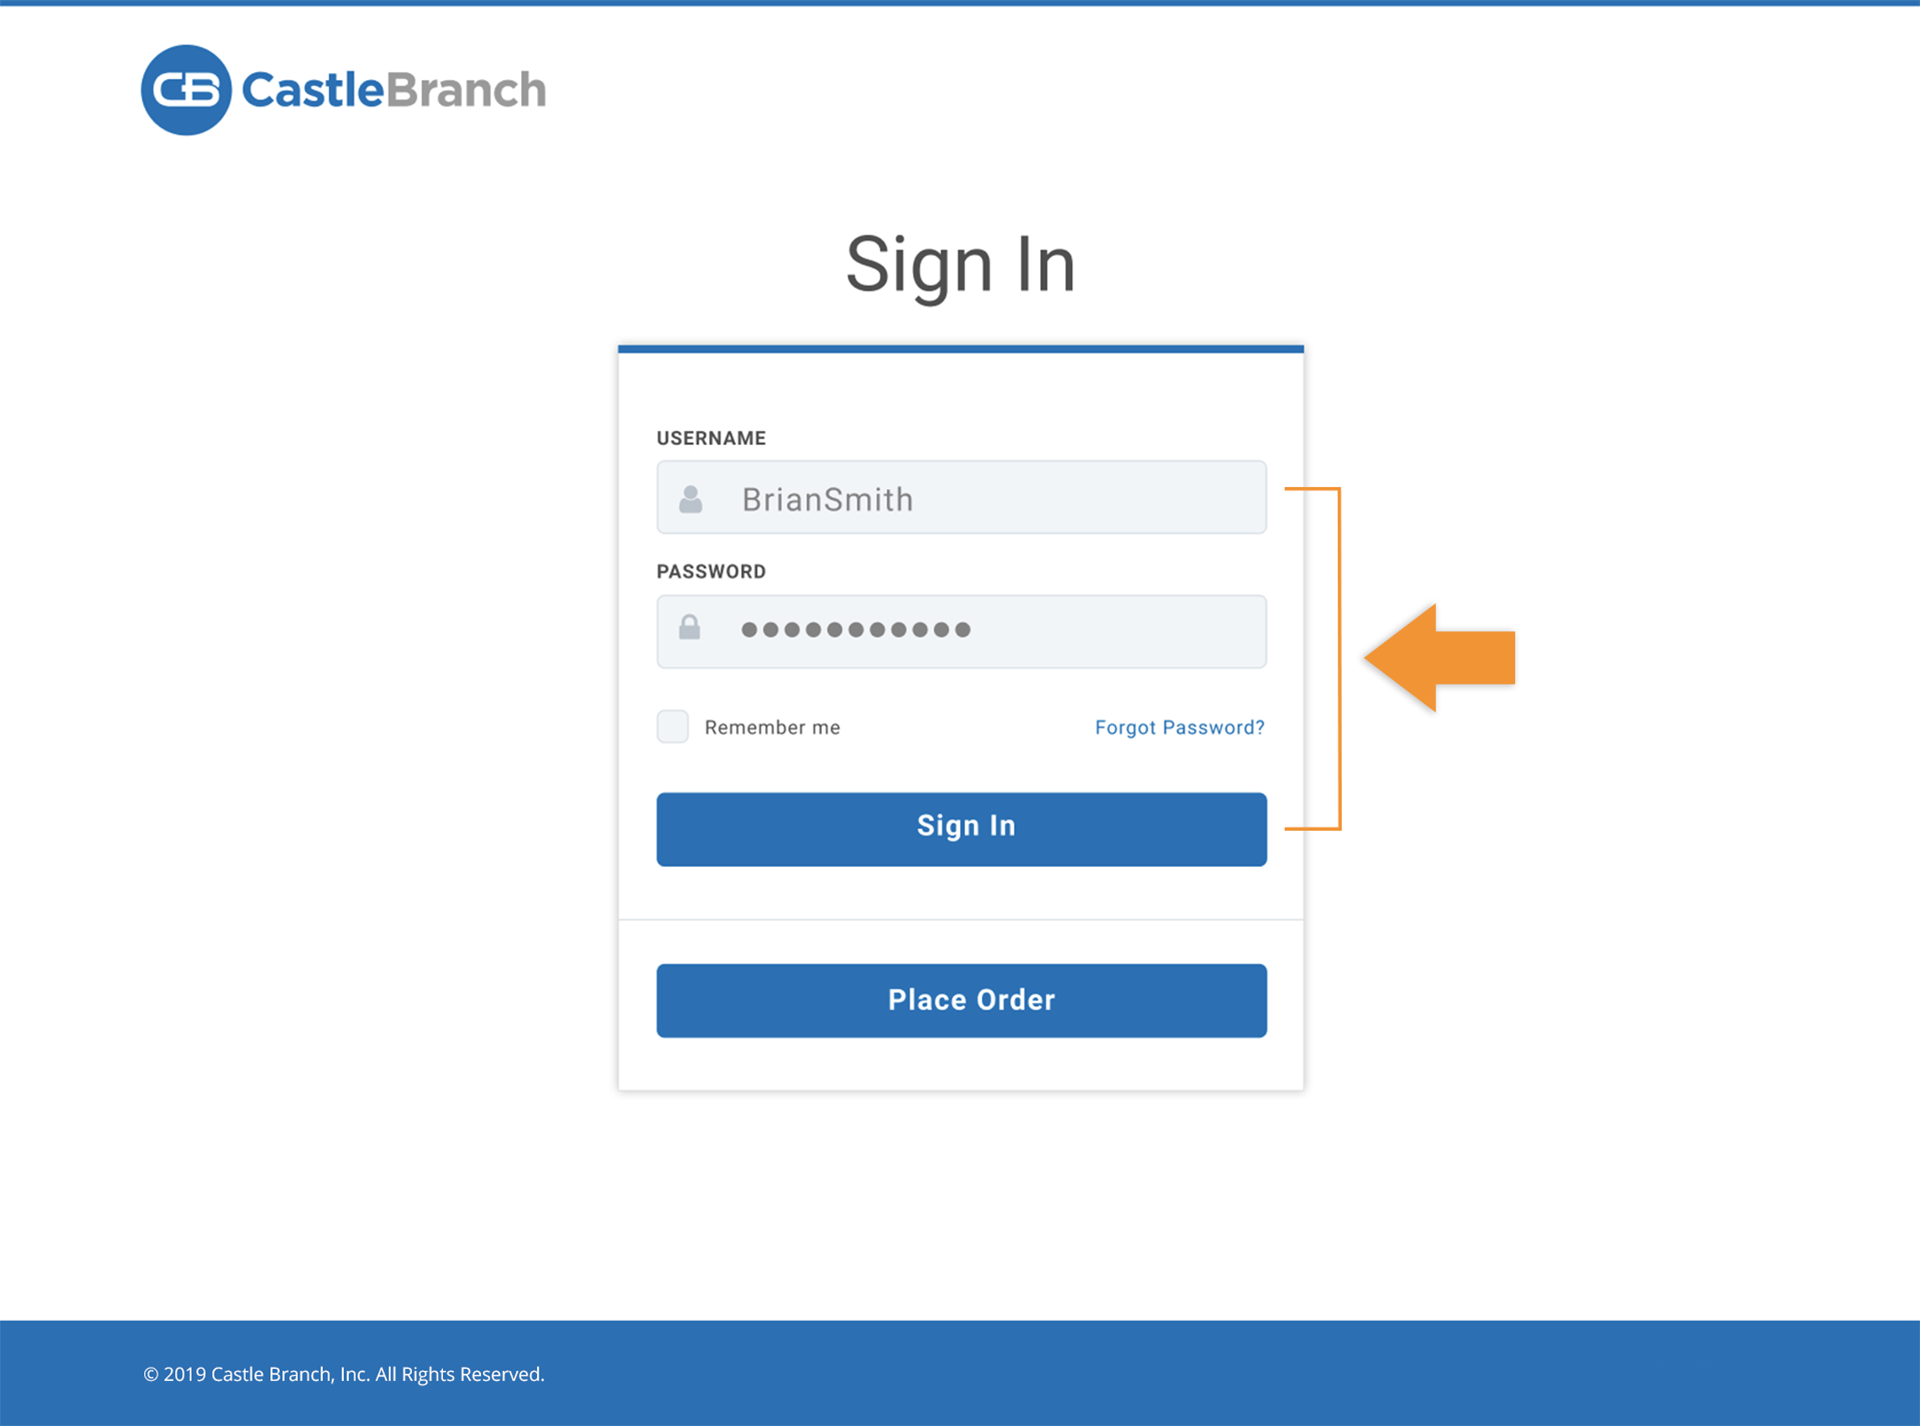 CastleBranch Simple Sign in Process–Sign In window prompting username and password fields with sign in button or place order button.